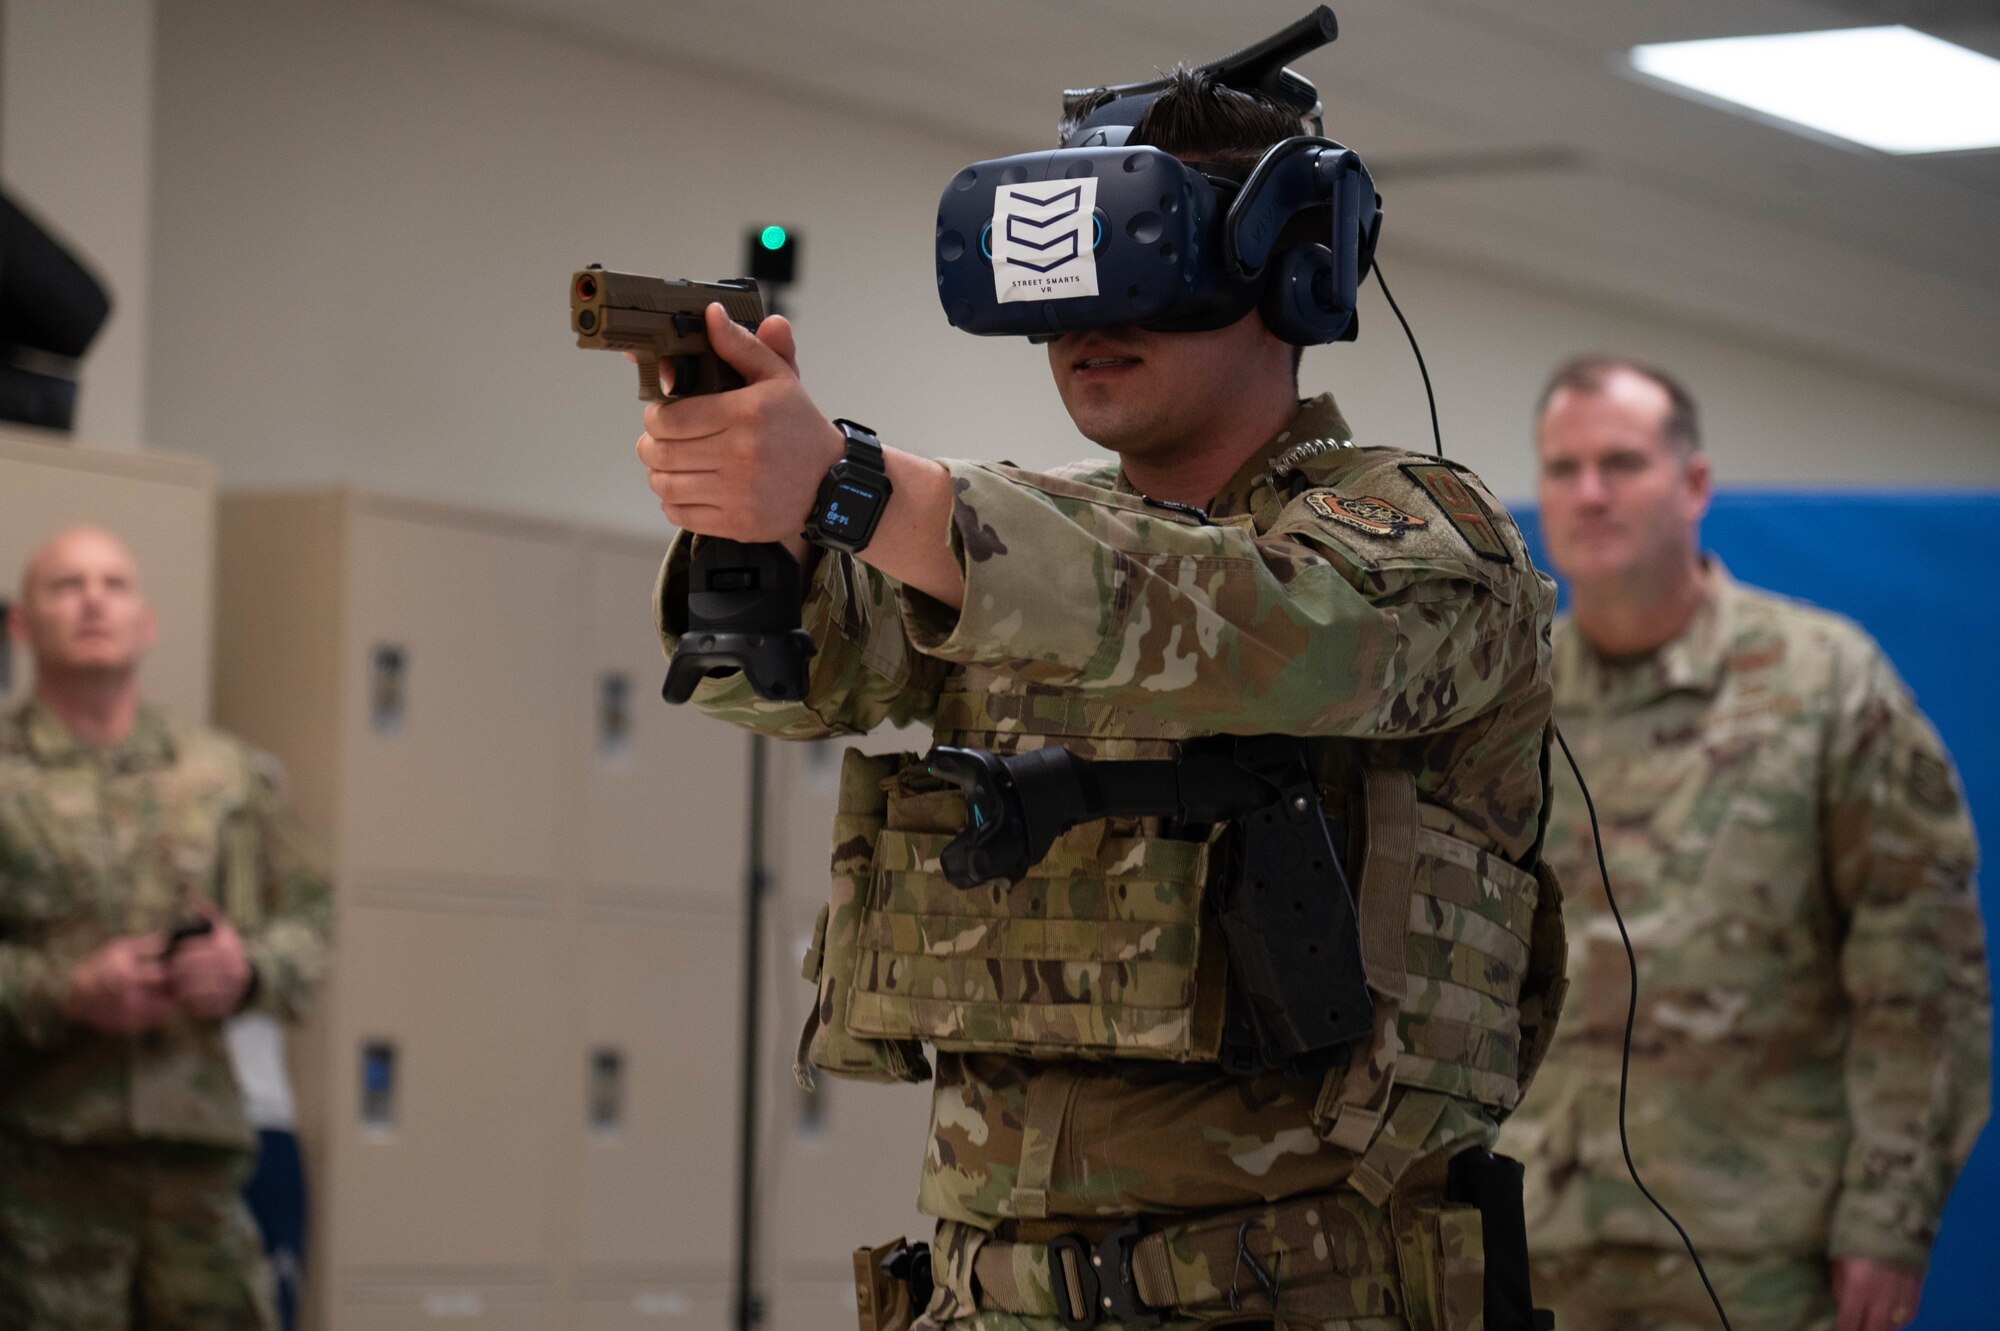 U.S. Air Force Senior Airman Kyle Ramirez, 375th Security Forces Squadron instructor, demonstrates Virtual Reality training equipment for high stress scenarios to Maj. Gen. Kenneth T. Bibb, 18th Air Force commander, and Chief Master Sgt. Chad Bickley, 18th Air Force command chief, trains for an aggressive situation using a virtual headset during a tour at Scott Air Force Base, Illinois, March 9, 2022. This device is utilized for training purposes in the 375th Security Forces Squadron to increase defender’s efficiency in responding. (U.S. Air Force photo by Airman 1st Class Mark Sulaica)